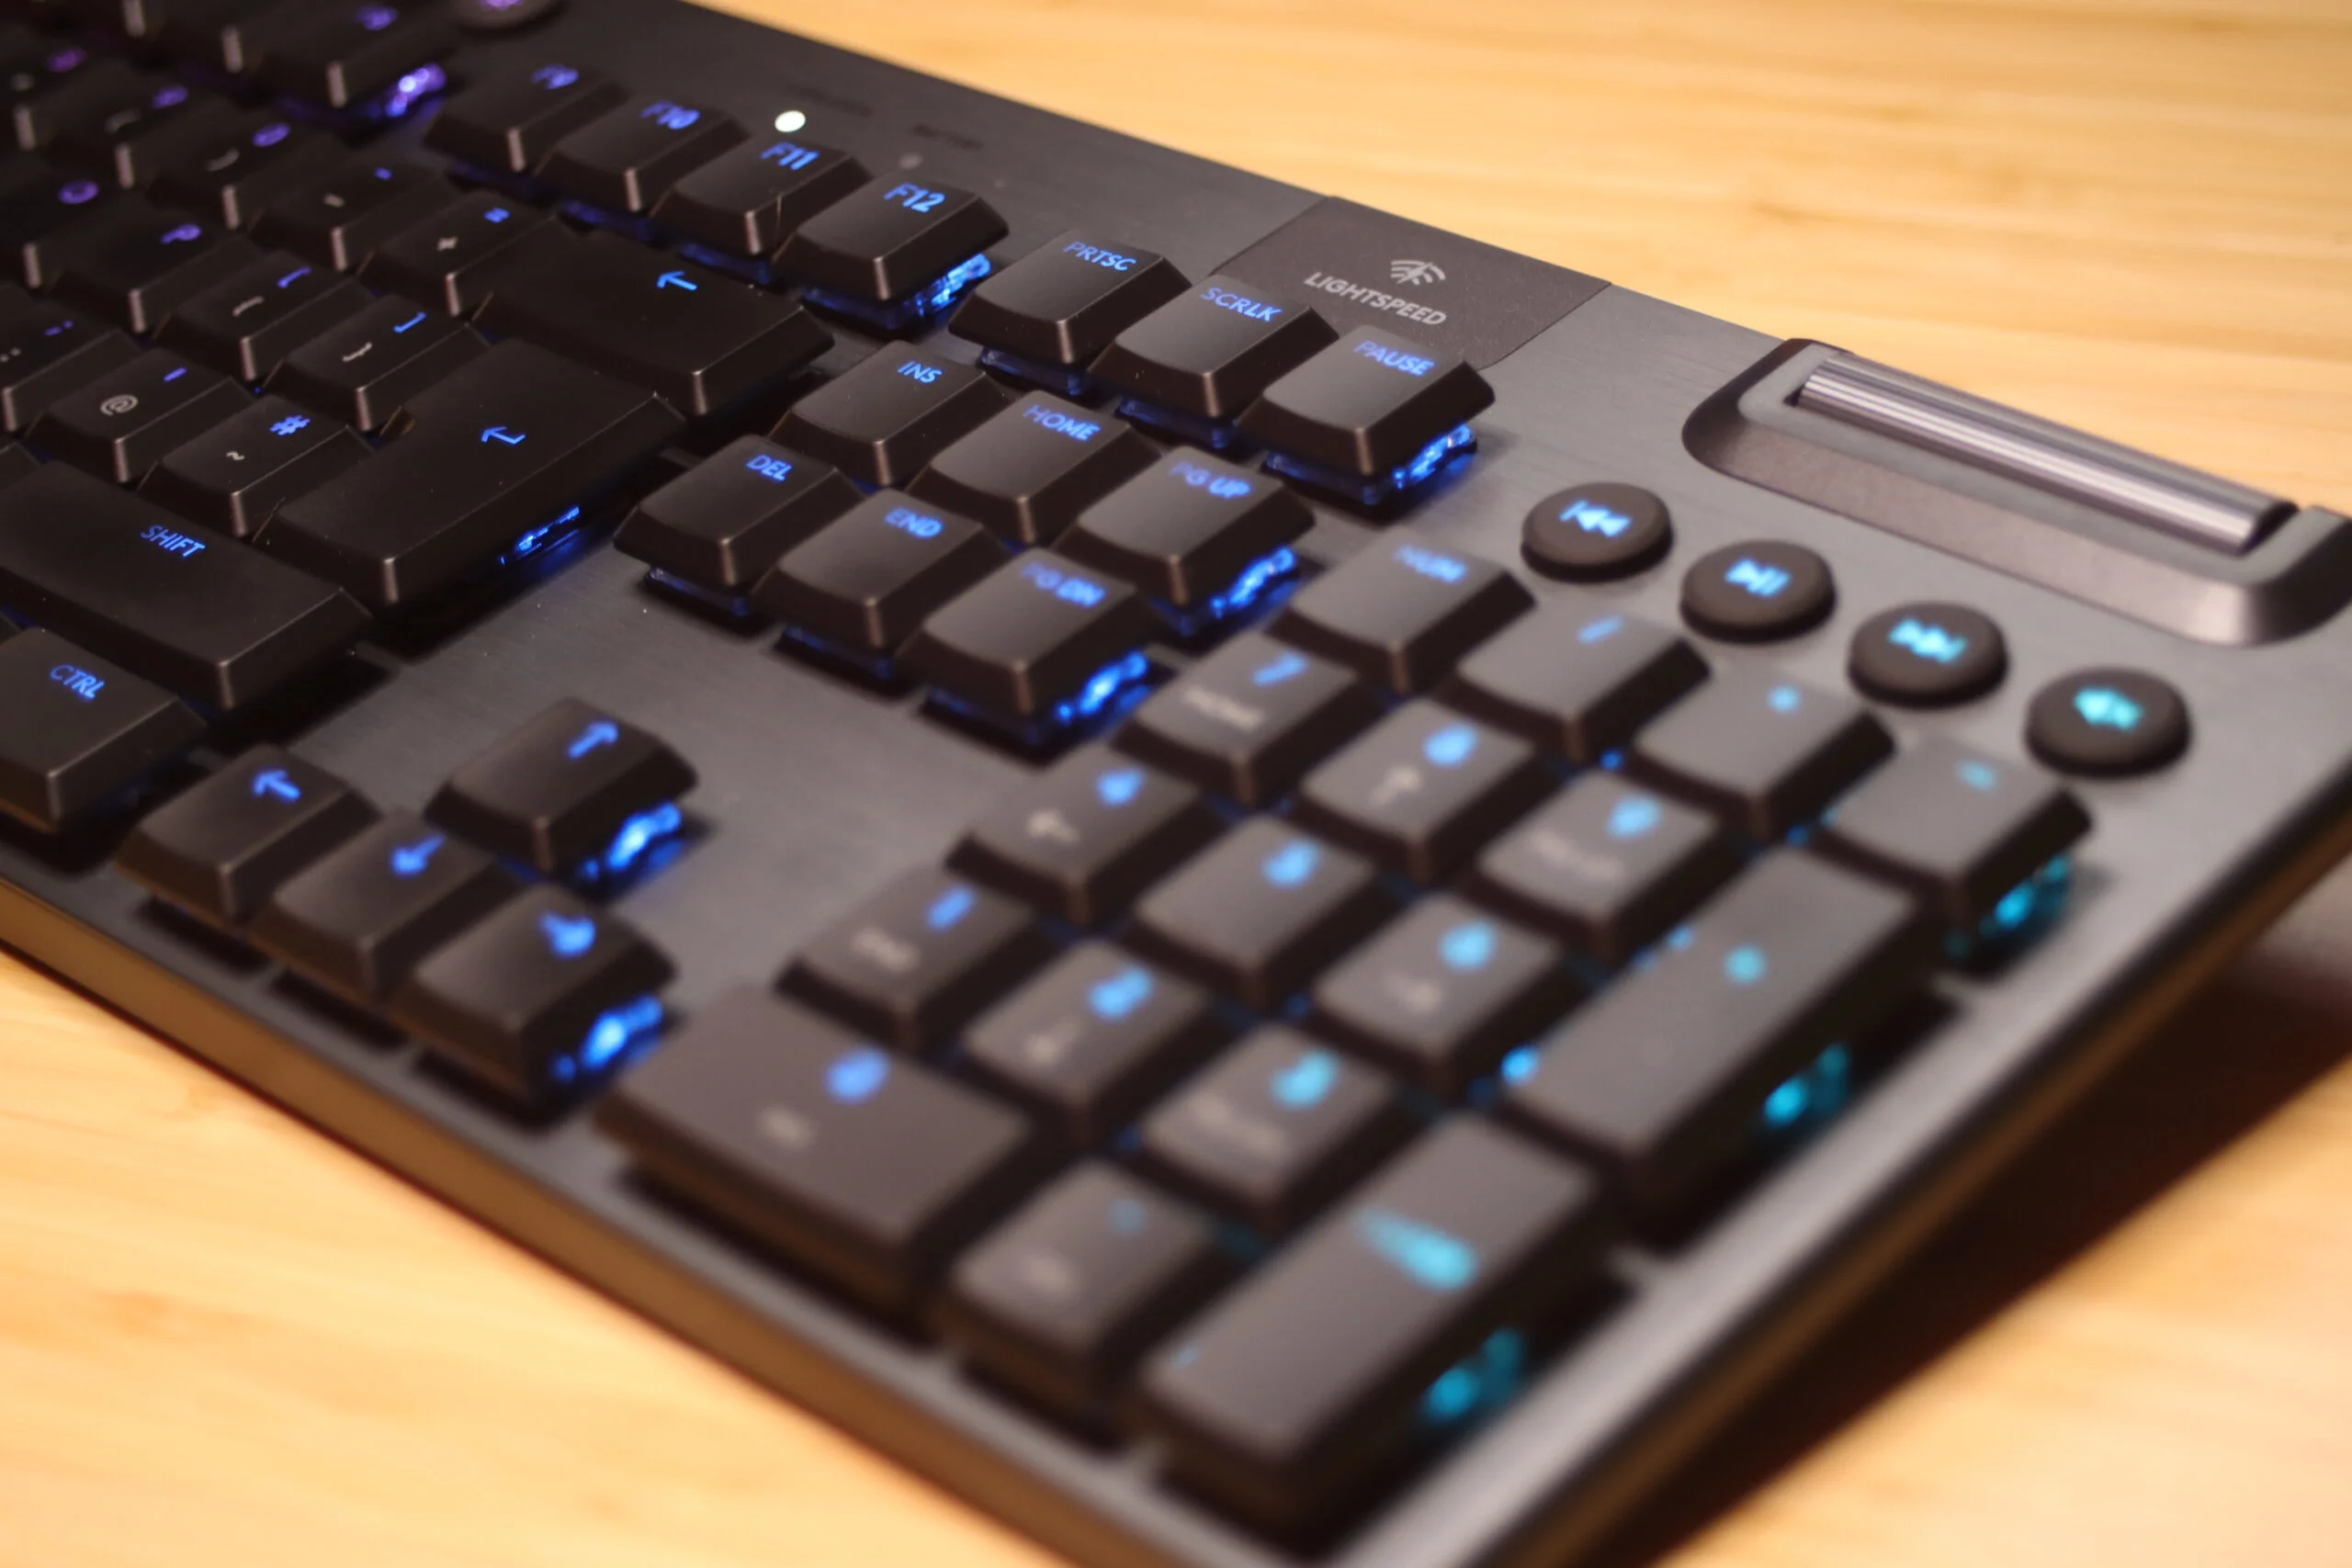 Logitech G915 Keyboard Review: A Gamers Perspective